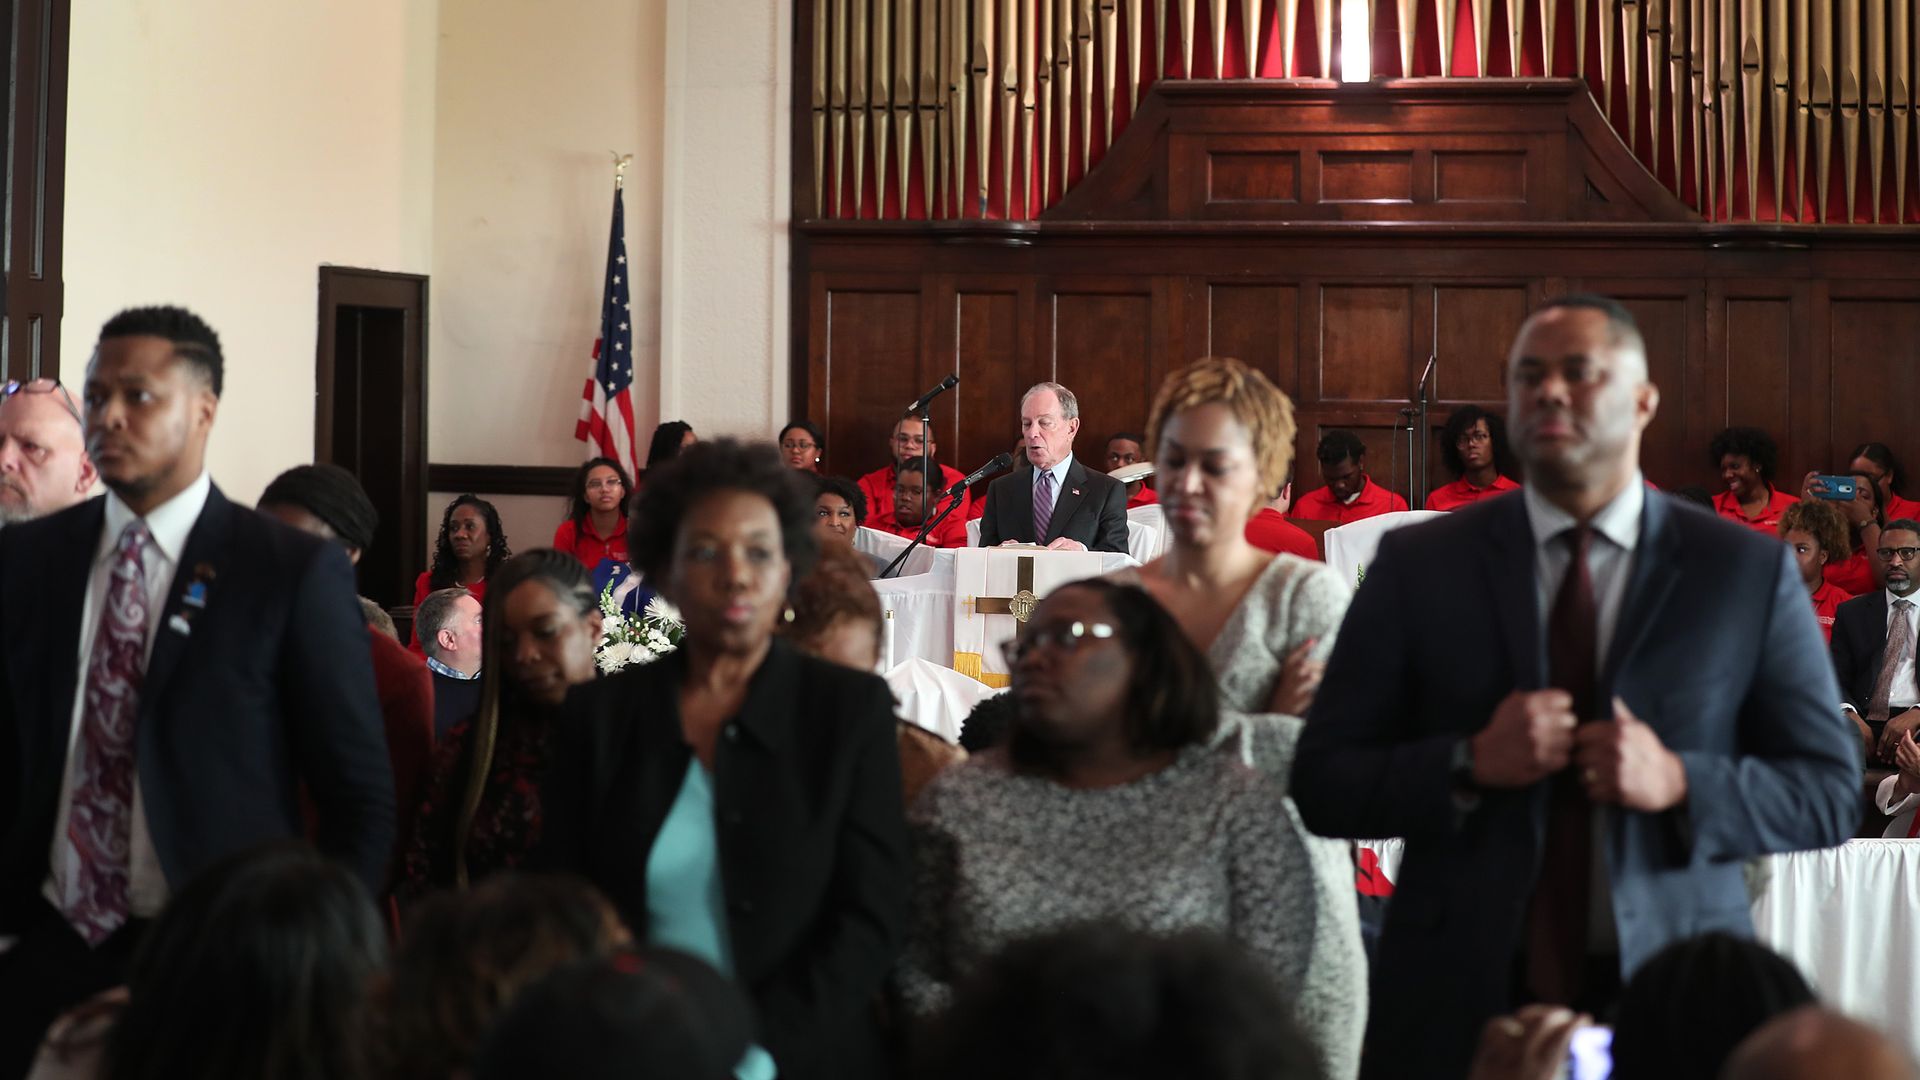 People stand with their backs to Democratic presidential candidate Mike Bloomberg as he speaks during a worship event at the Brown Chapel AME Church on March 1, 2020 in Selma, Alabama.